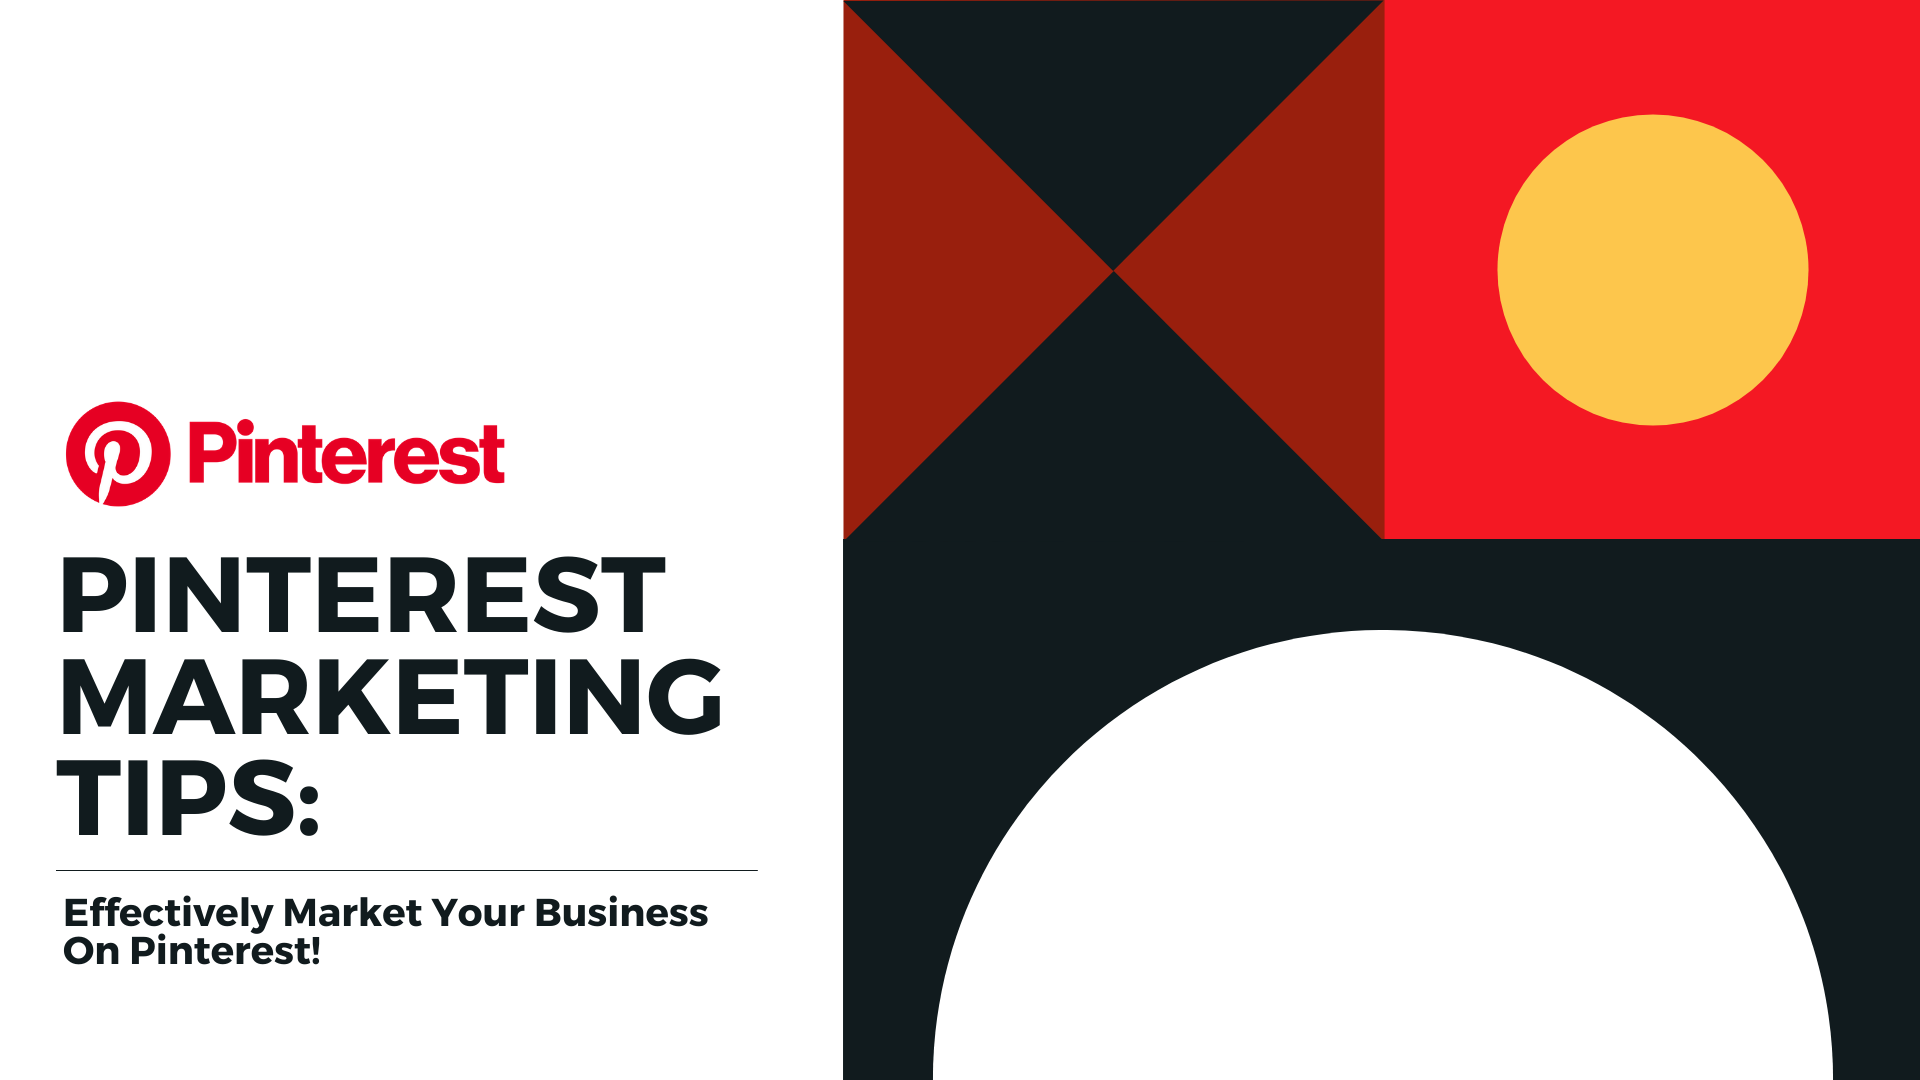 Pinterest Marketing Tips and Tools